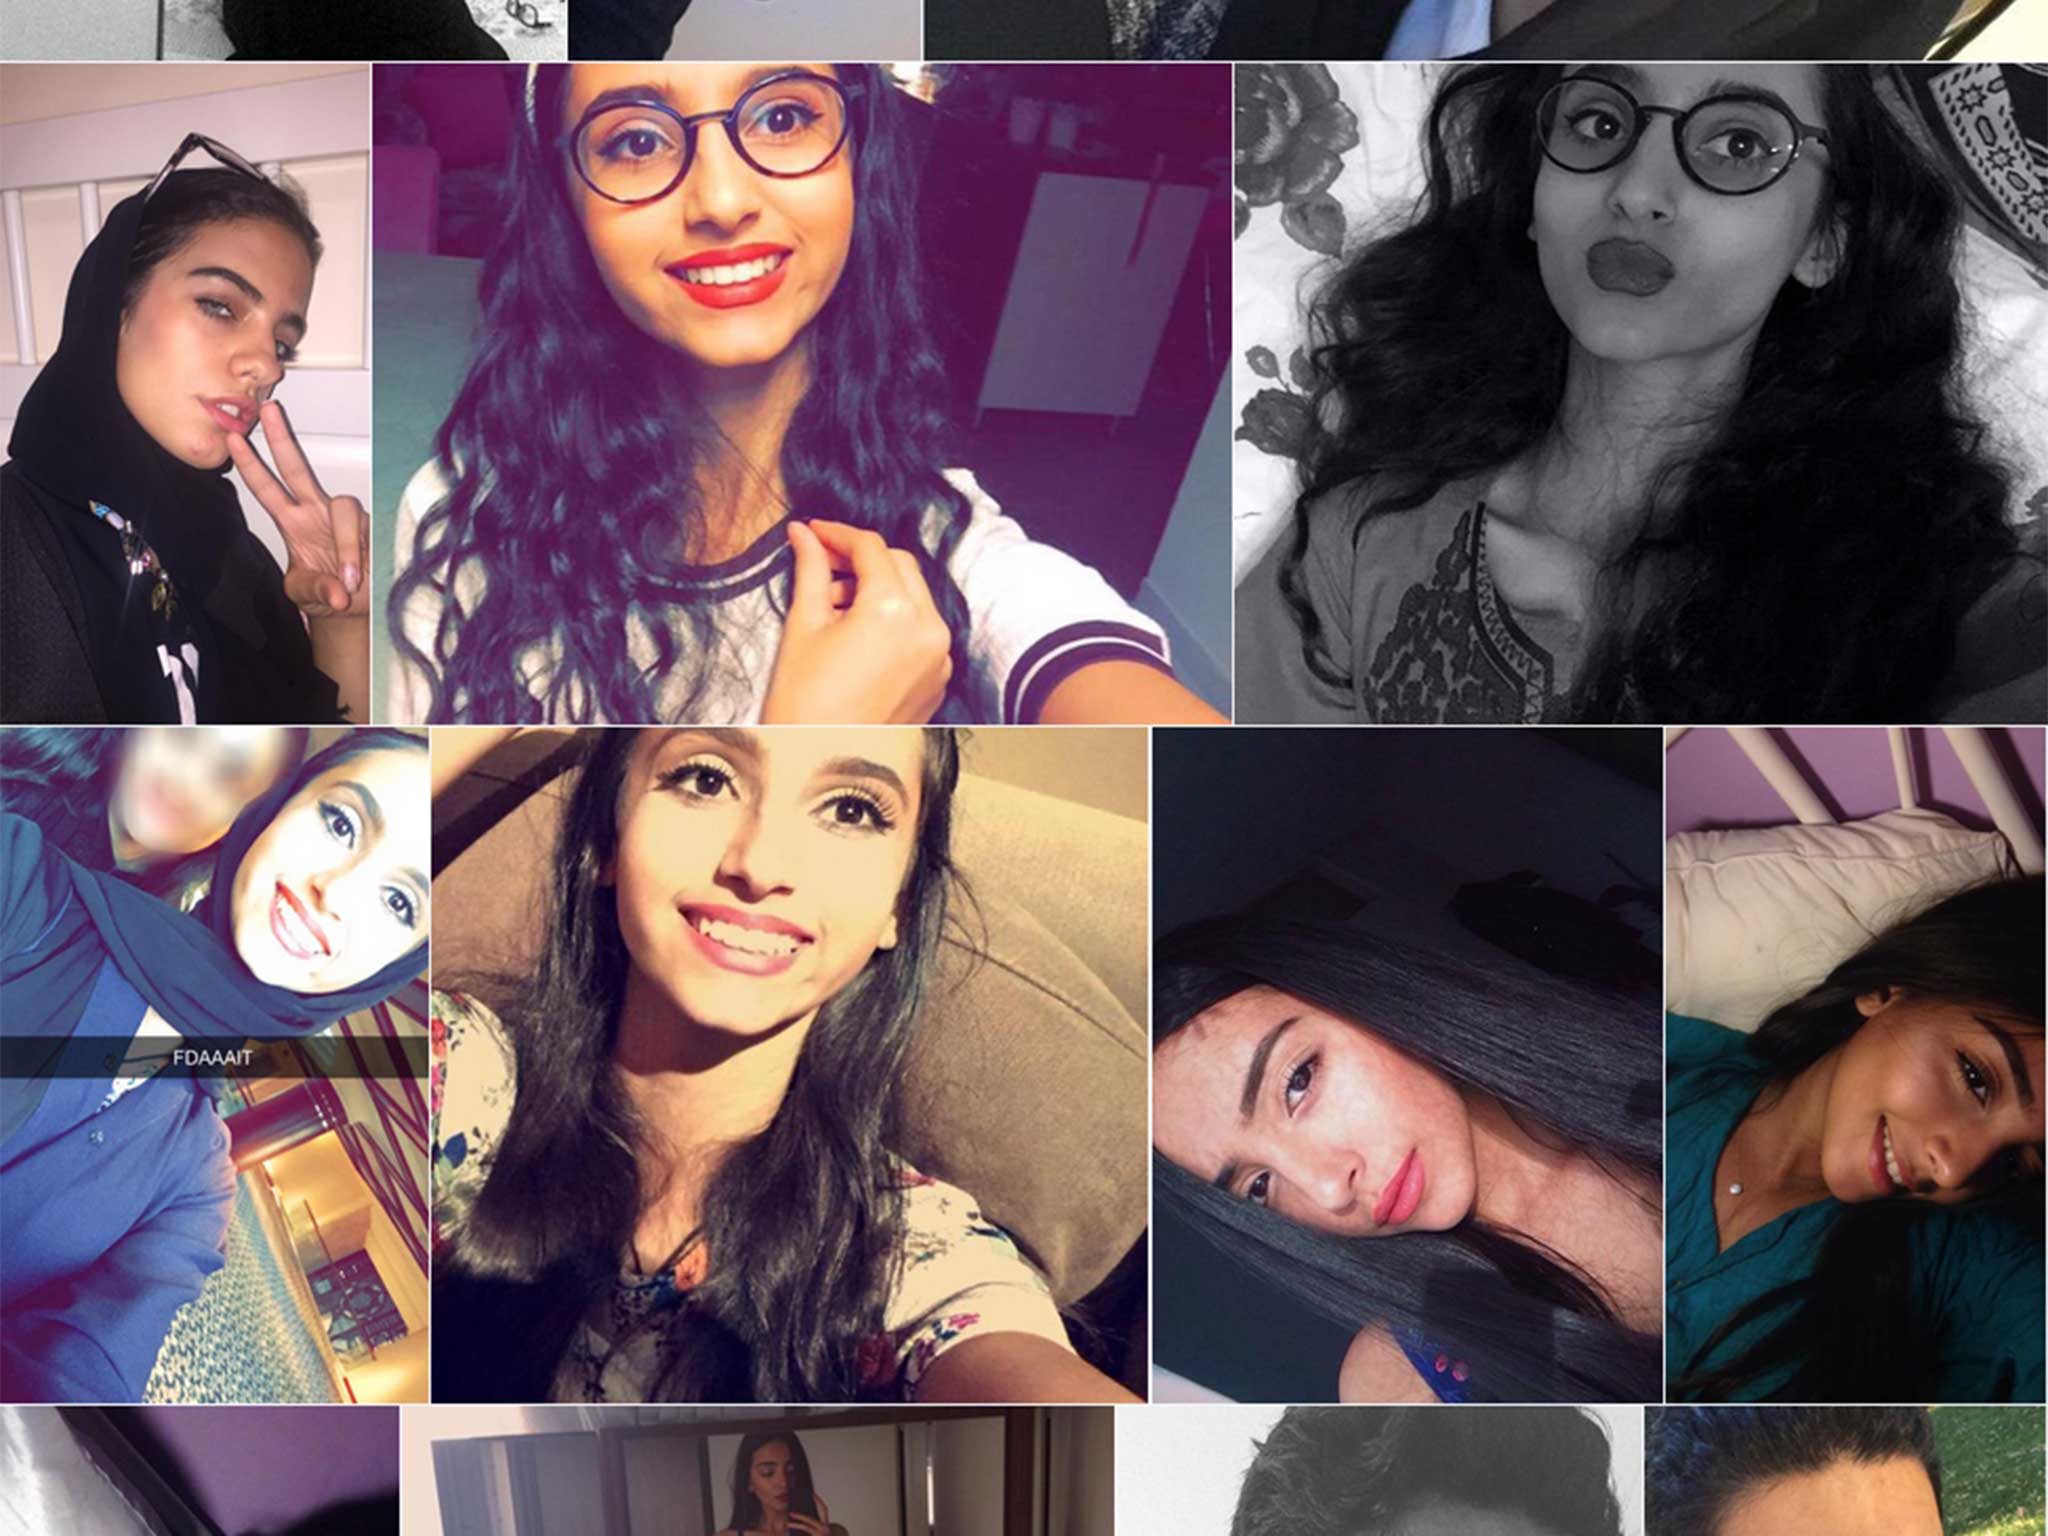 A screengrab from Twitter showing some of the woman and girls participating in the hashtag